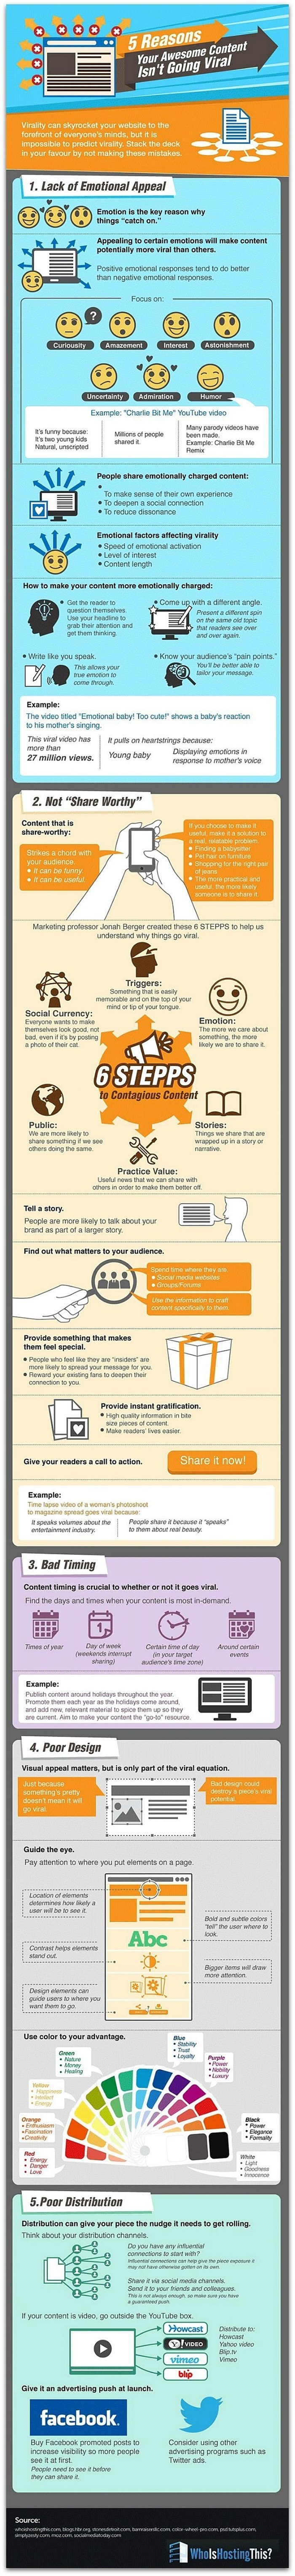 Make_Content_Go_Viral_Infographic